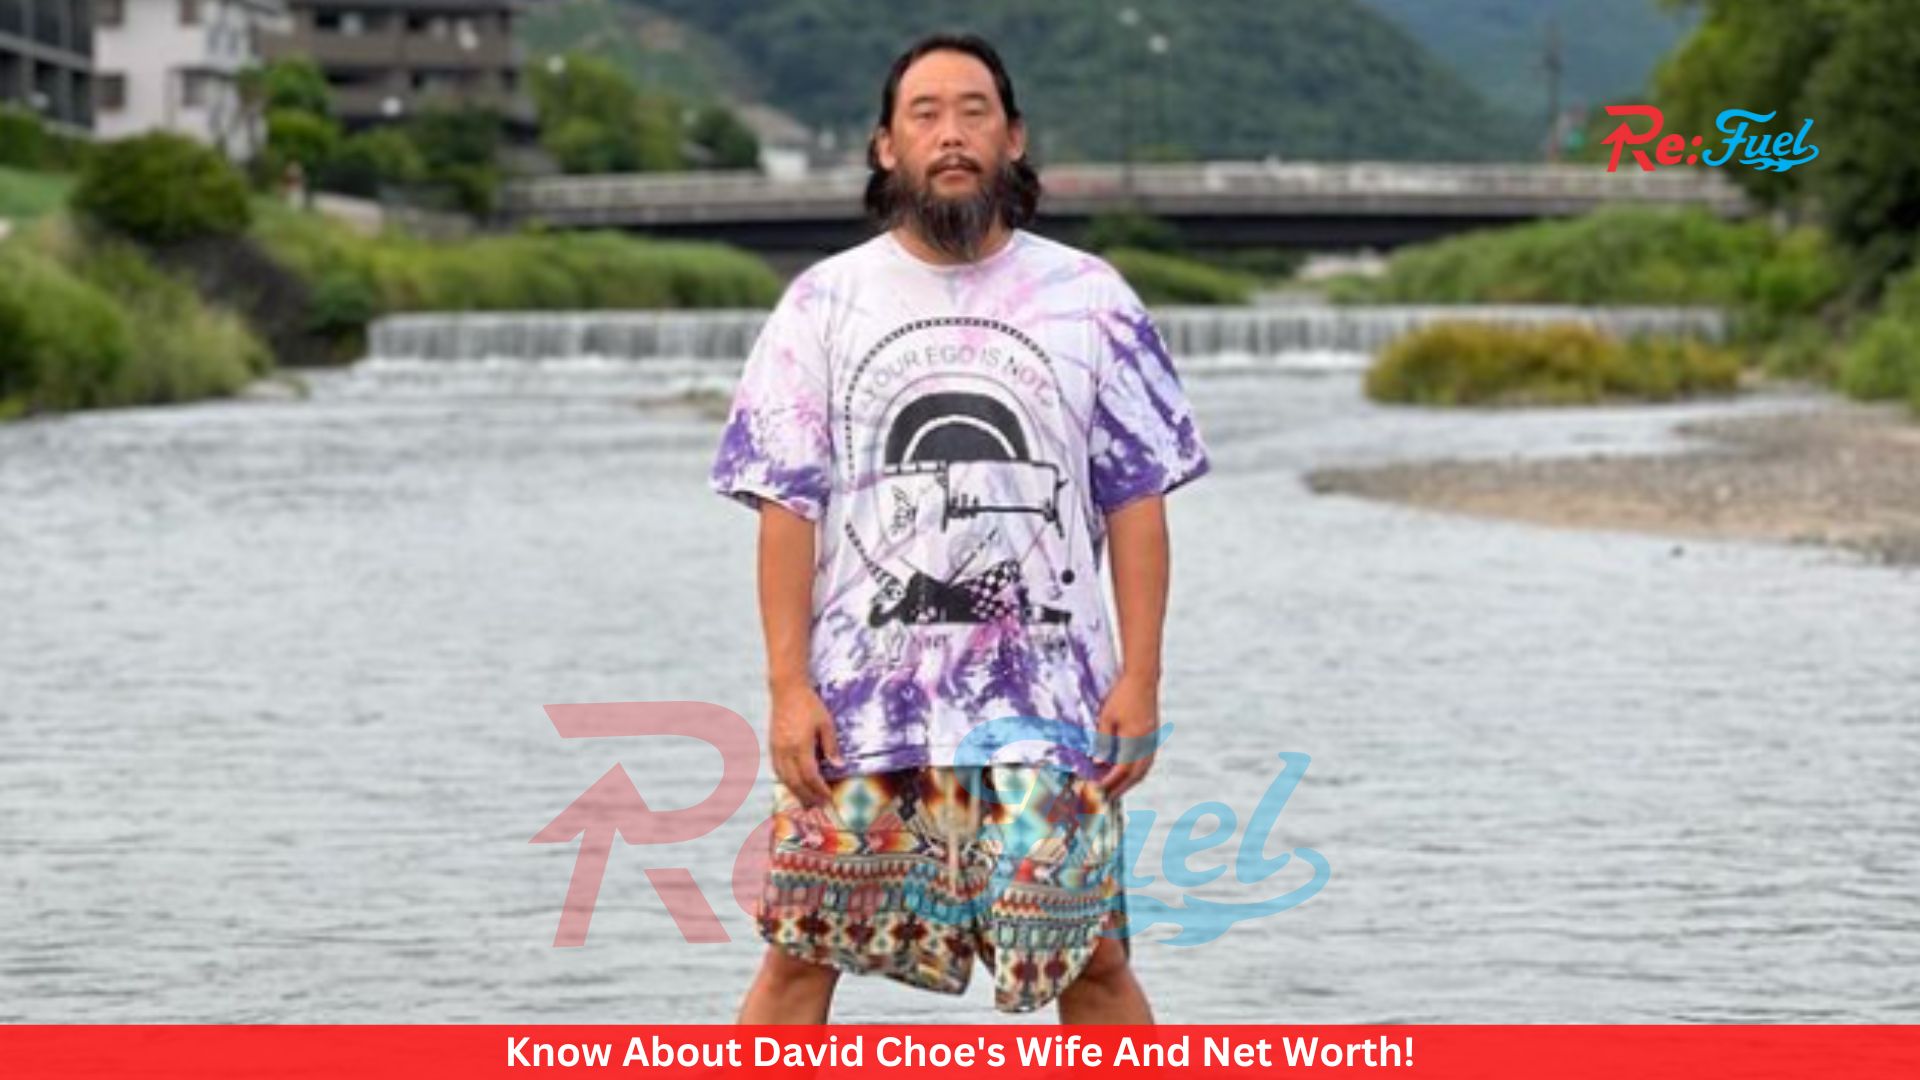 Know About David Choe's Wife And Net Worth!